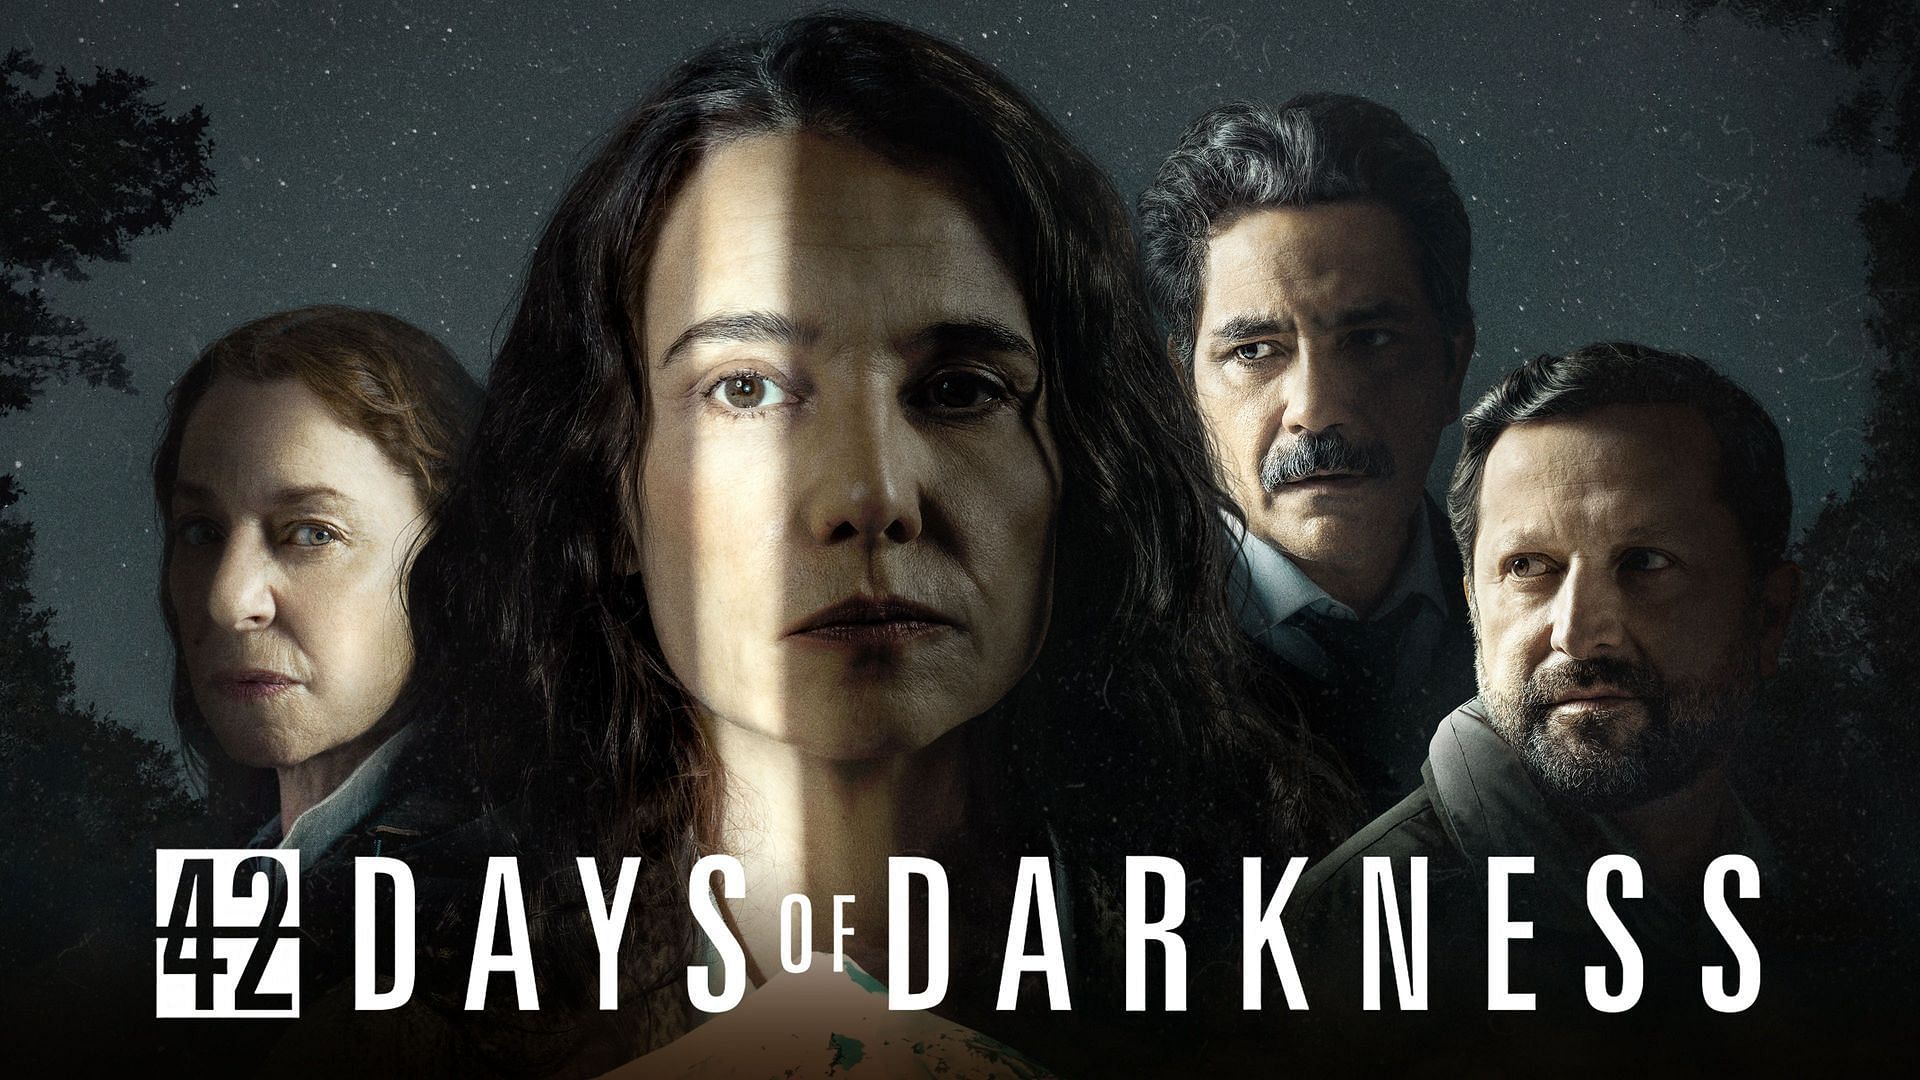 Netflix&#039;s official poster for 42 days of Darkness (Image via Netflix)